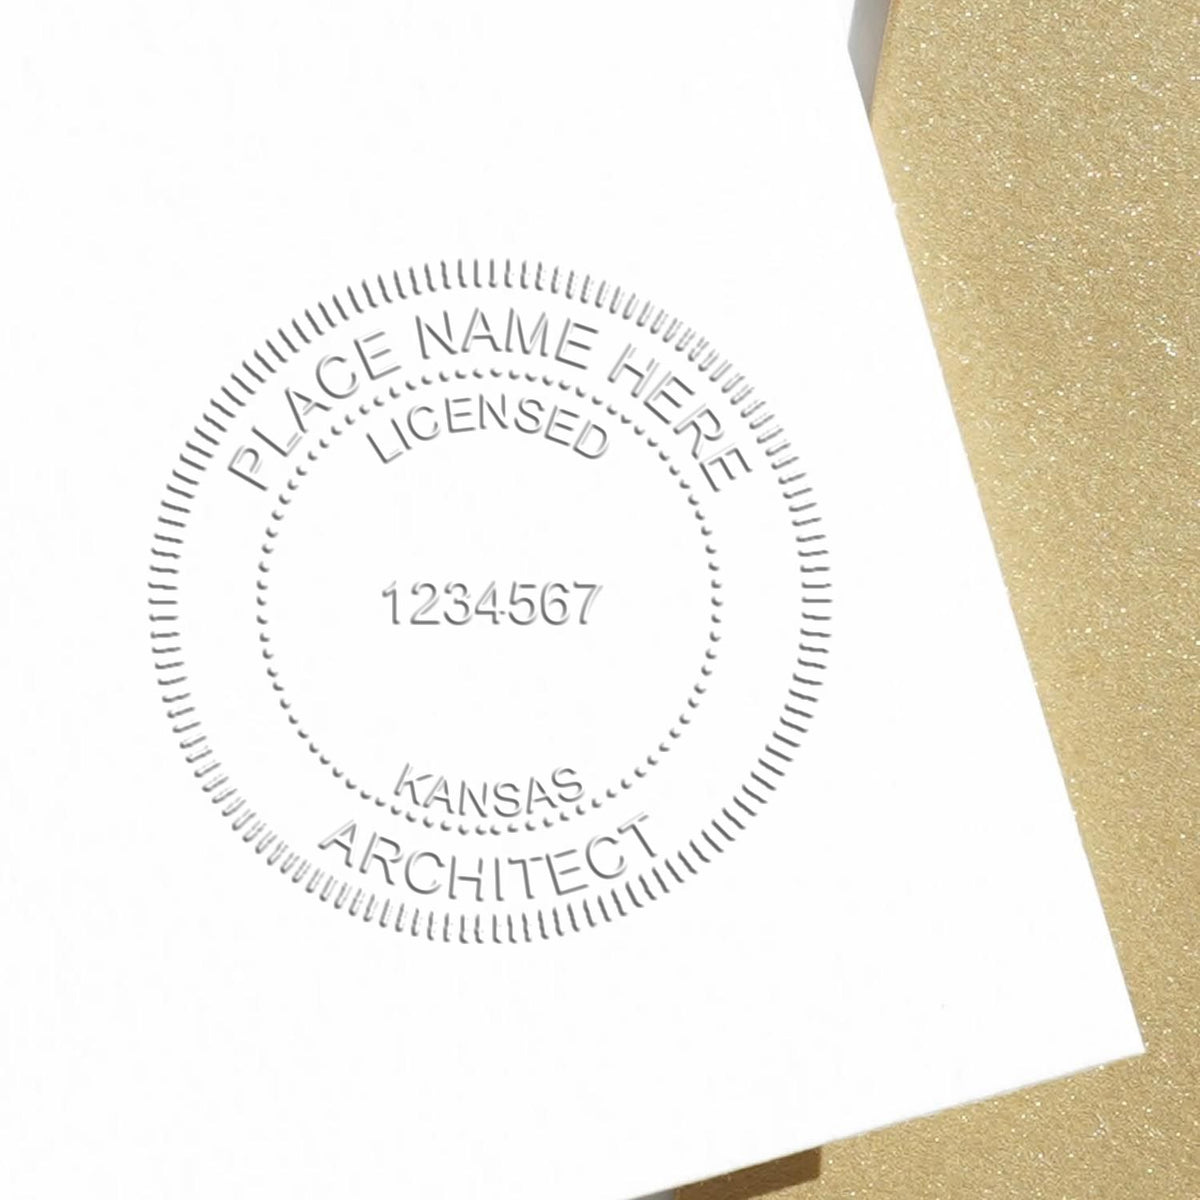 A stamped imprint of the Gift Kansas Architect Seal in this stylish lifestyle photo, setting the tone for a unique and personalized product.